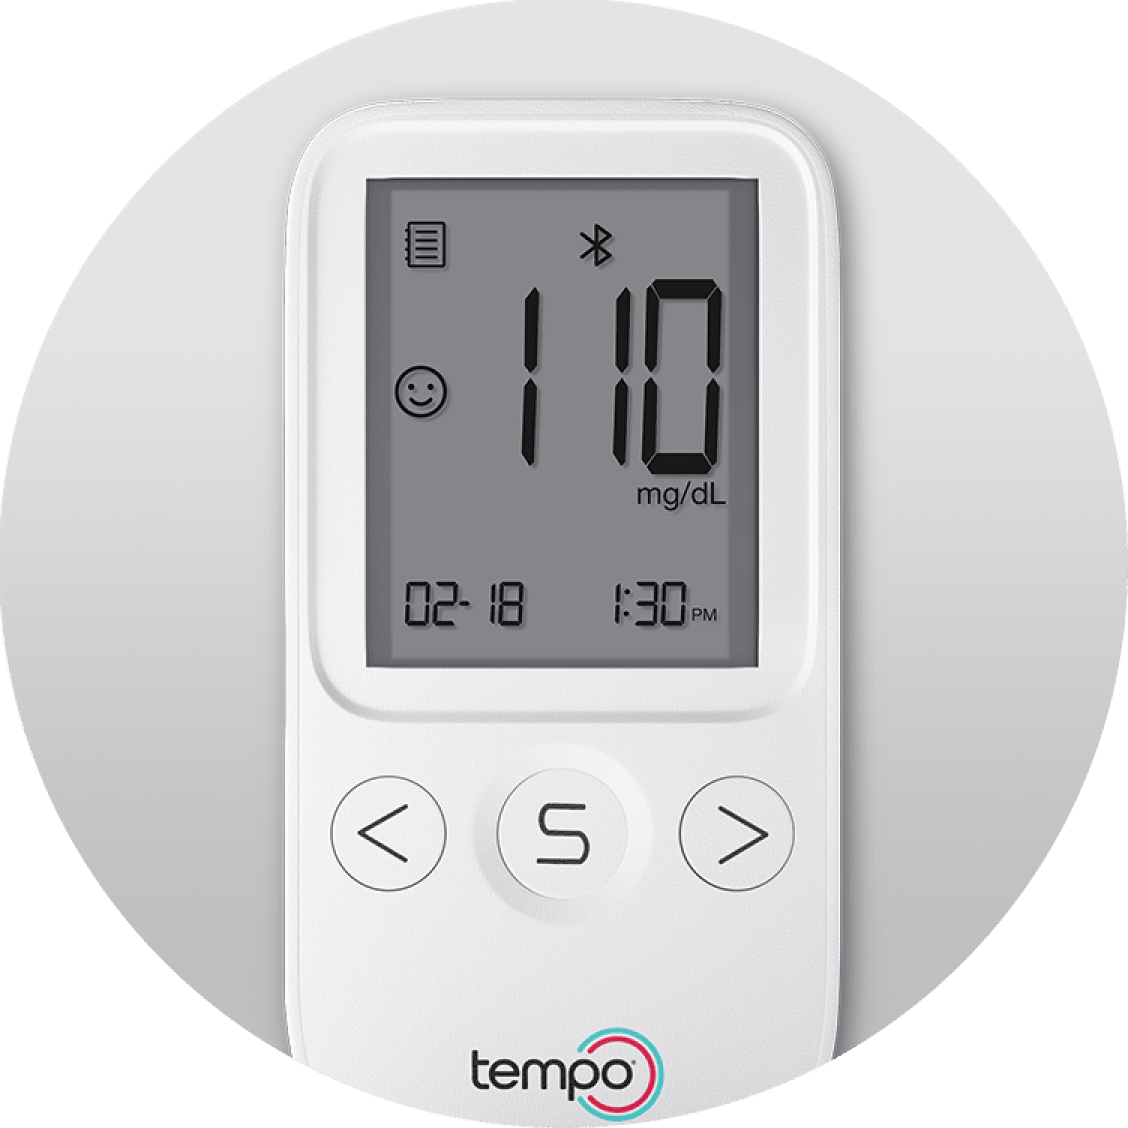 A Tempo Blood Glucose Meter